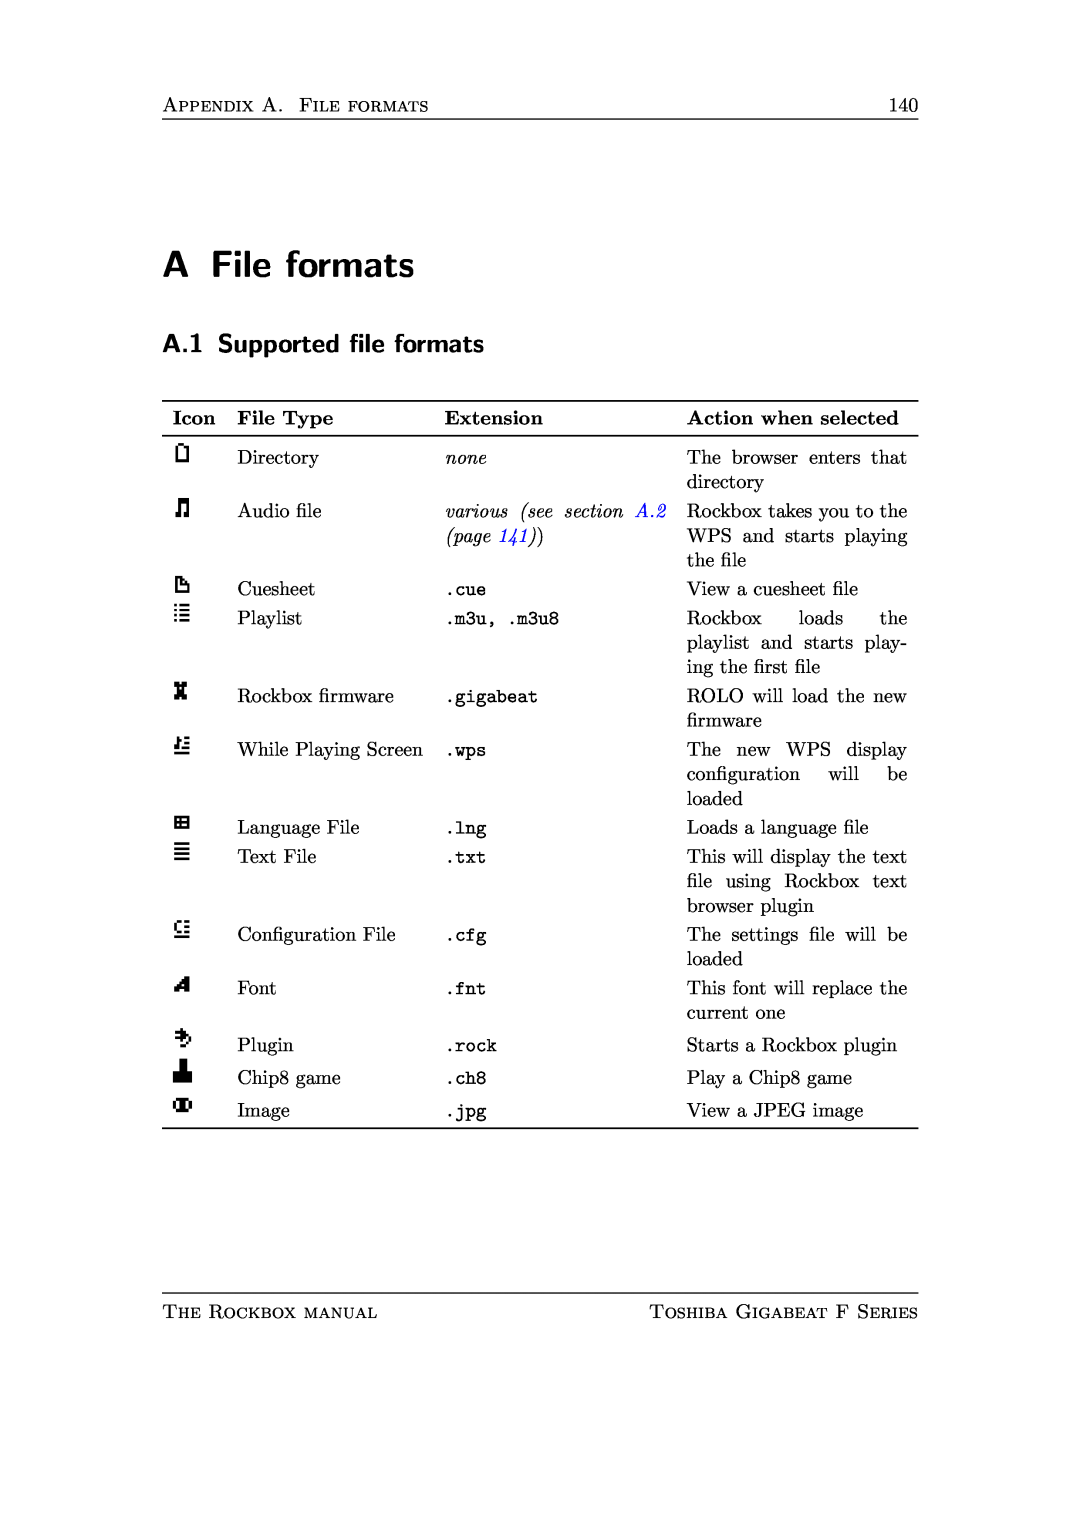 Toshiba F Series manual A File formats, A.1 Supported le formats 